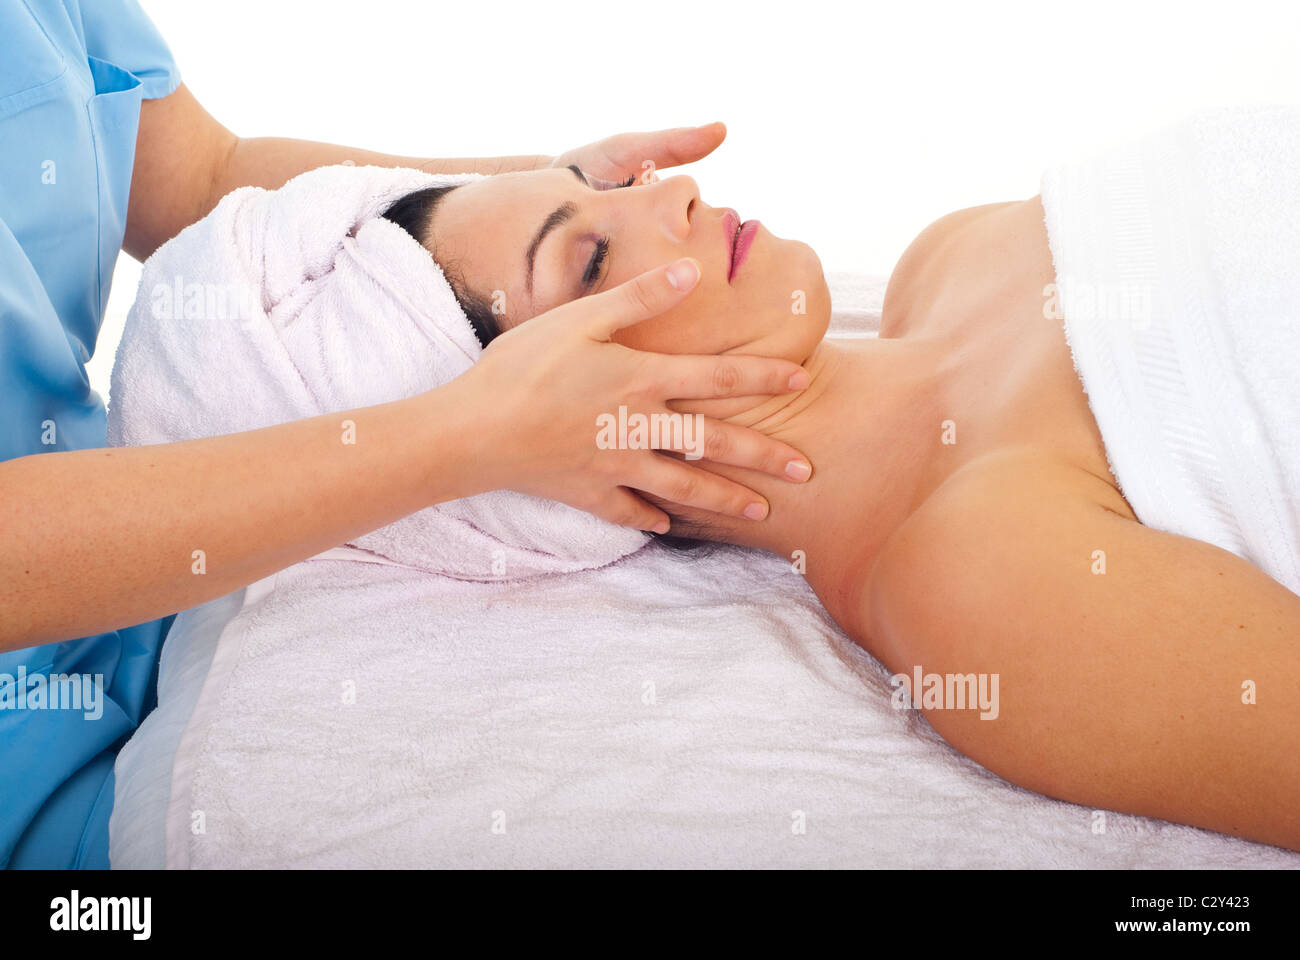 Beautiful woman relaxing with a facial massage at spa retreat Stock Photo